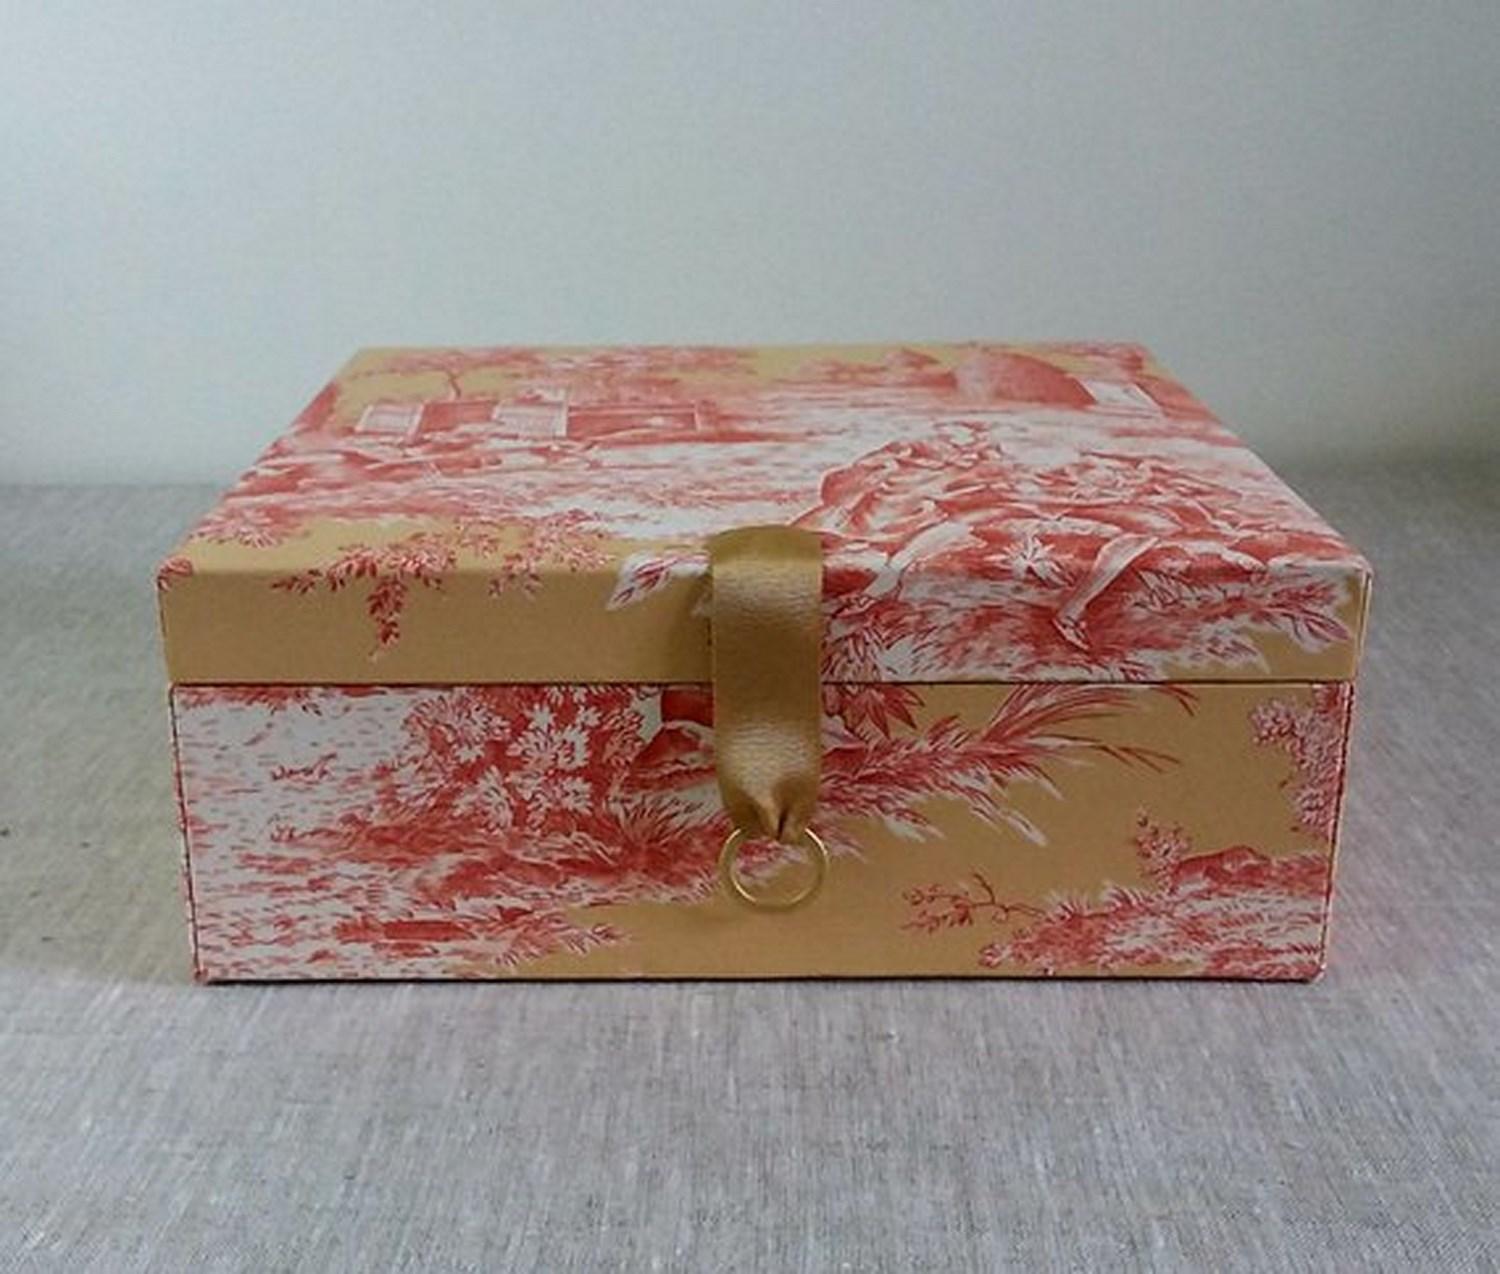 Beautiful storage box entirely handmade

Perfect for storing your Hermès scarves !

Made of Wood Cardboard and covered with Manuel Canovas Cotton Fabric

The lid is lightly padded and embellished with a ribbon

Pattern: Toile de Jouy (characters in